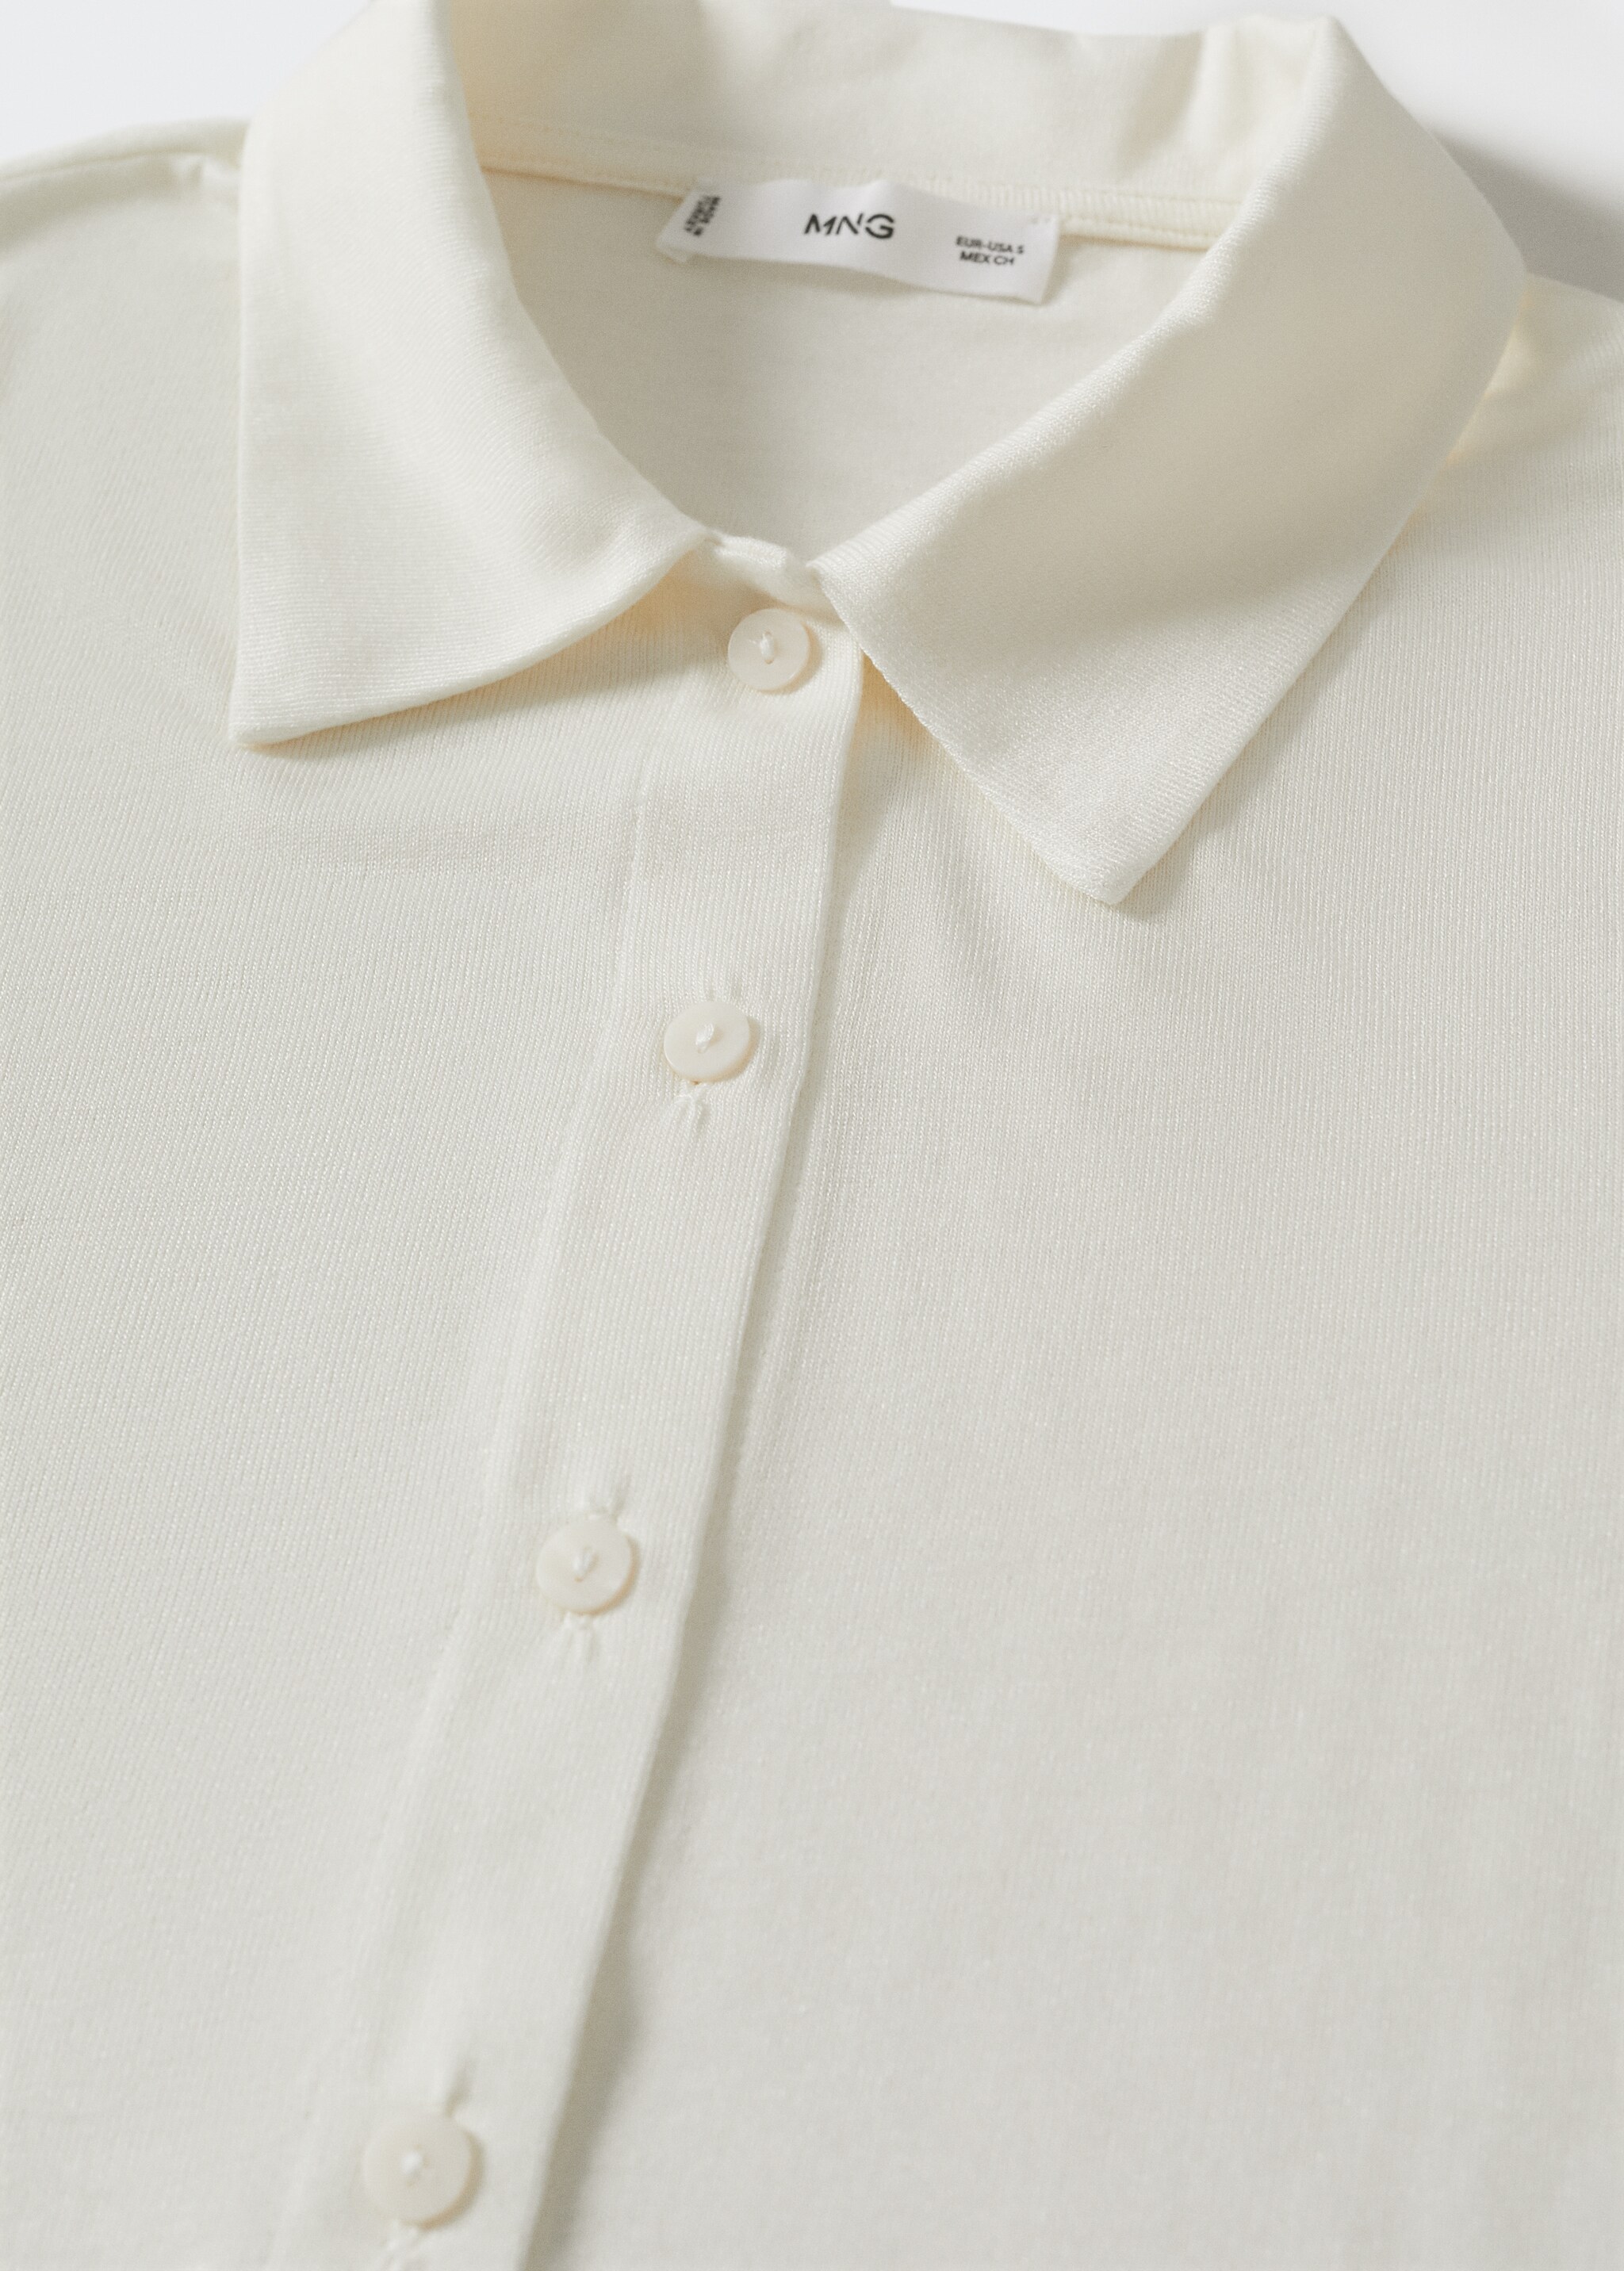 Fine knit shirt - Details of the article 8